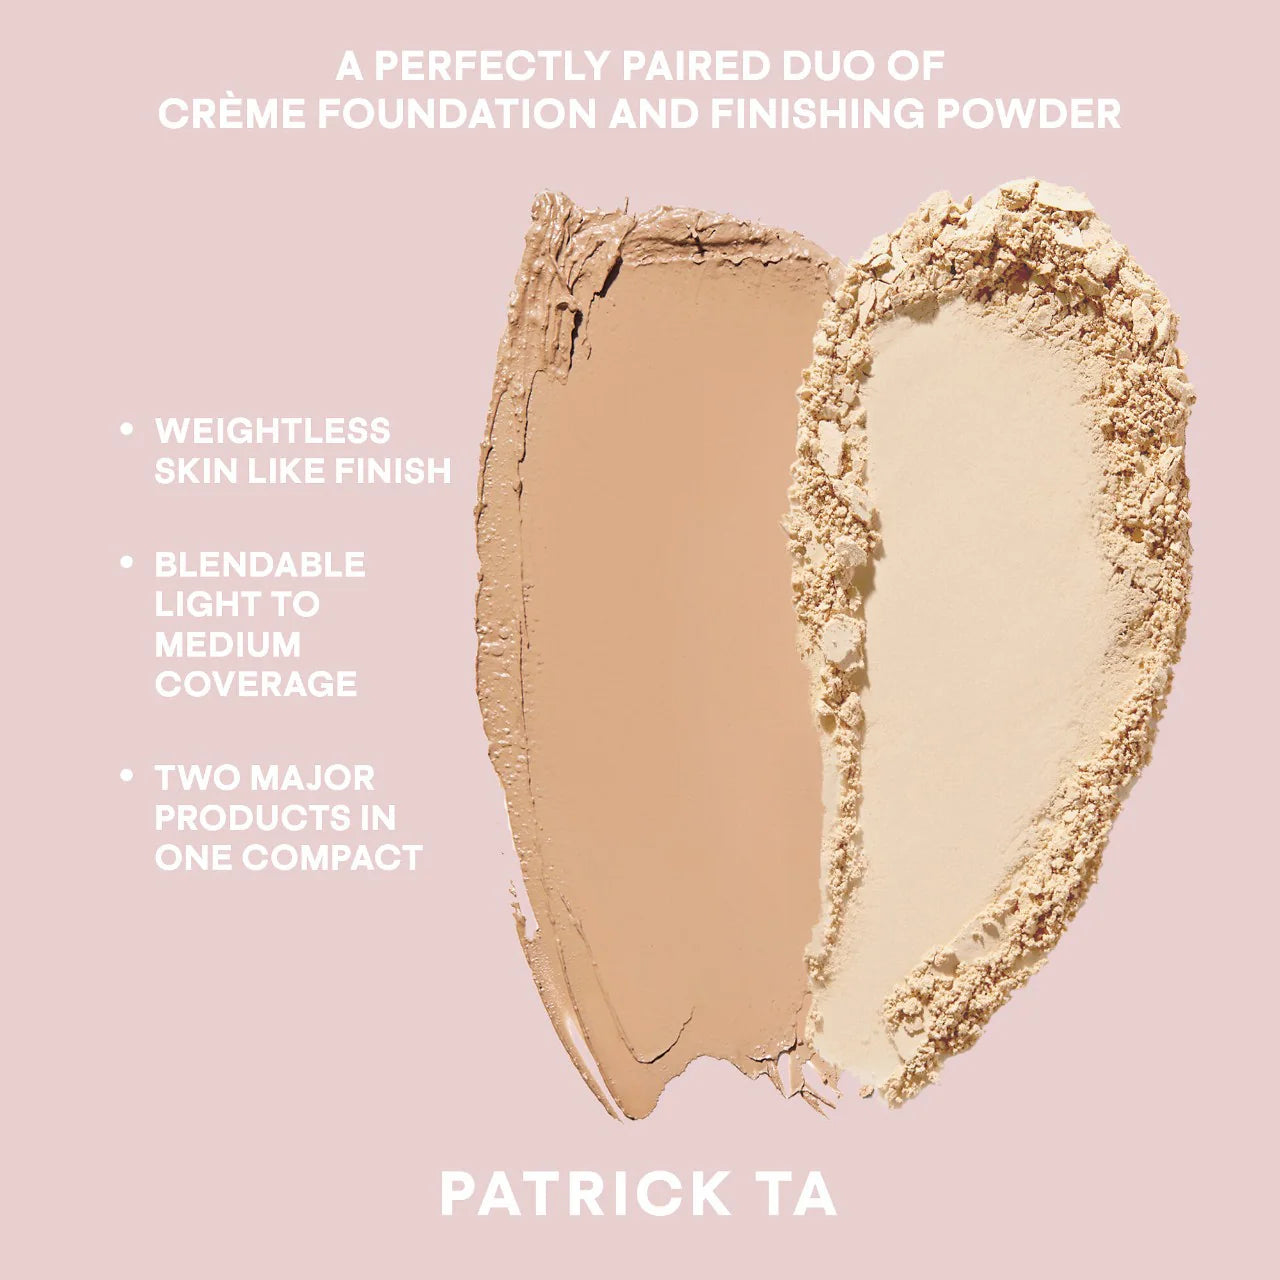 Major Skin Crème Foundation and Finishing Powder Duo